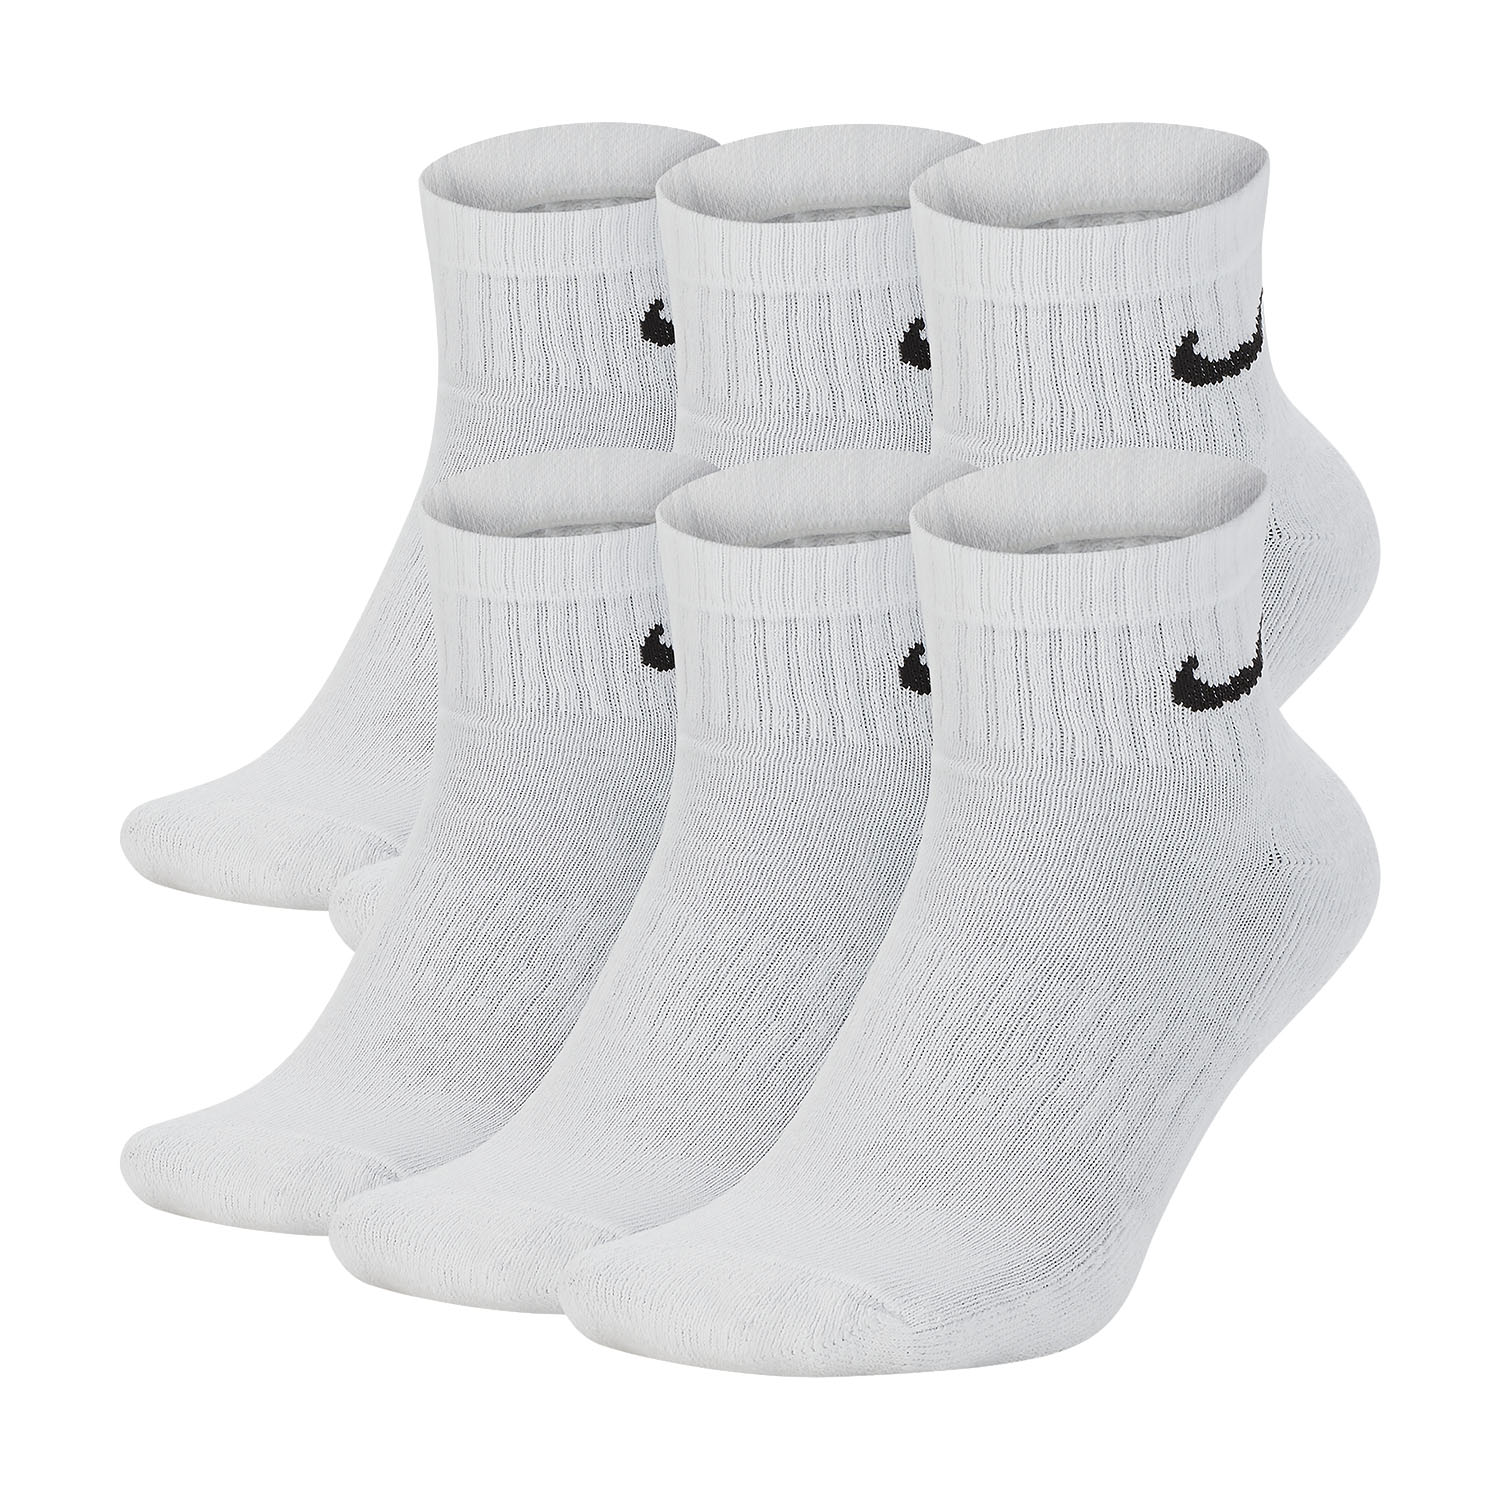 Vaca Mecánicamente Persona enferma Nike Everyday Cushion x 6 Calcetines de Running - White/Black